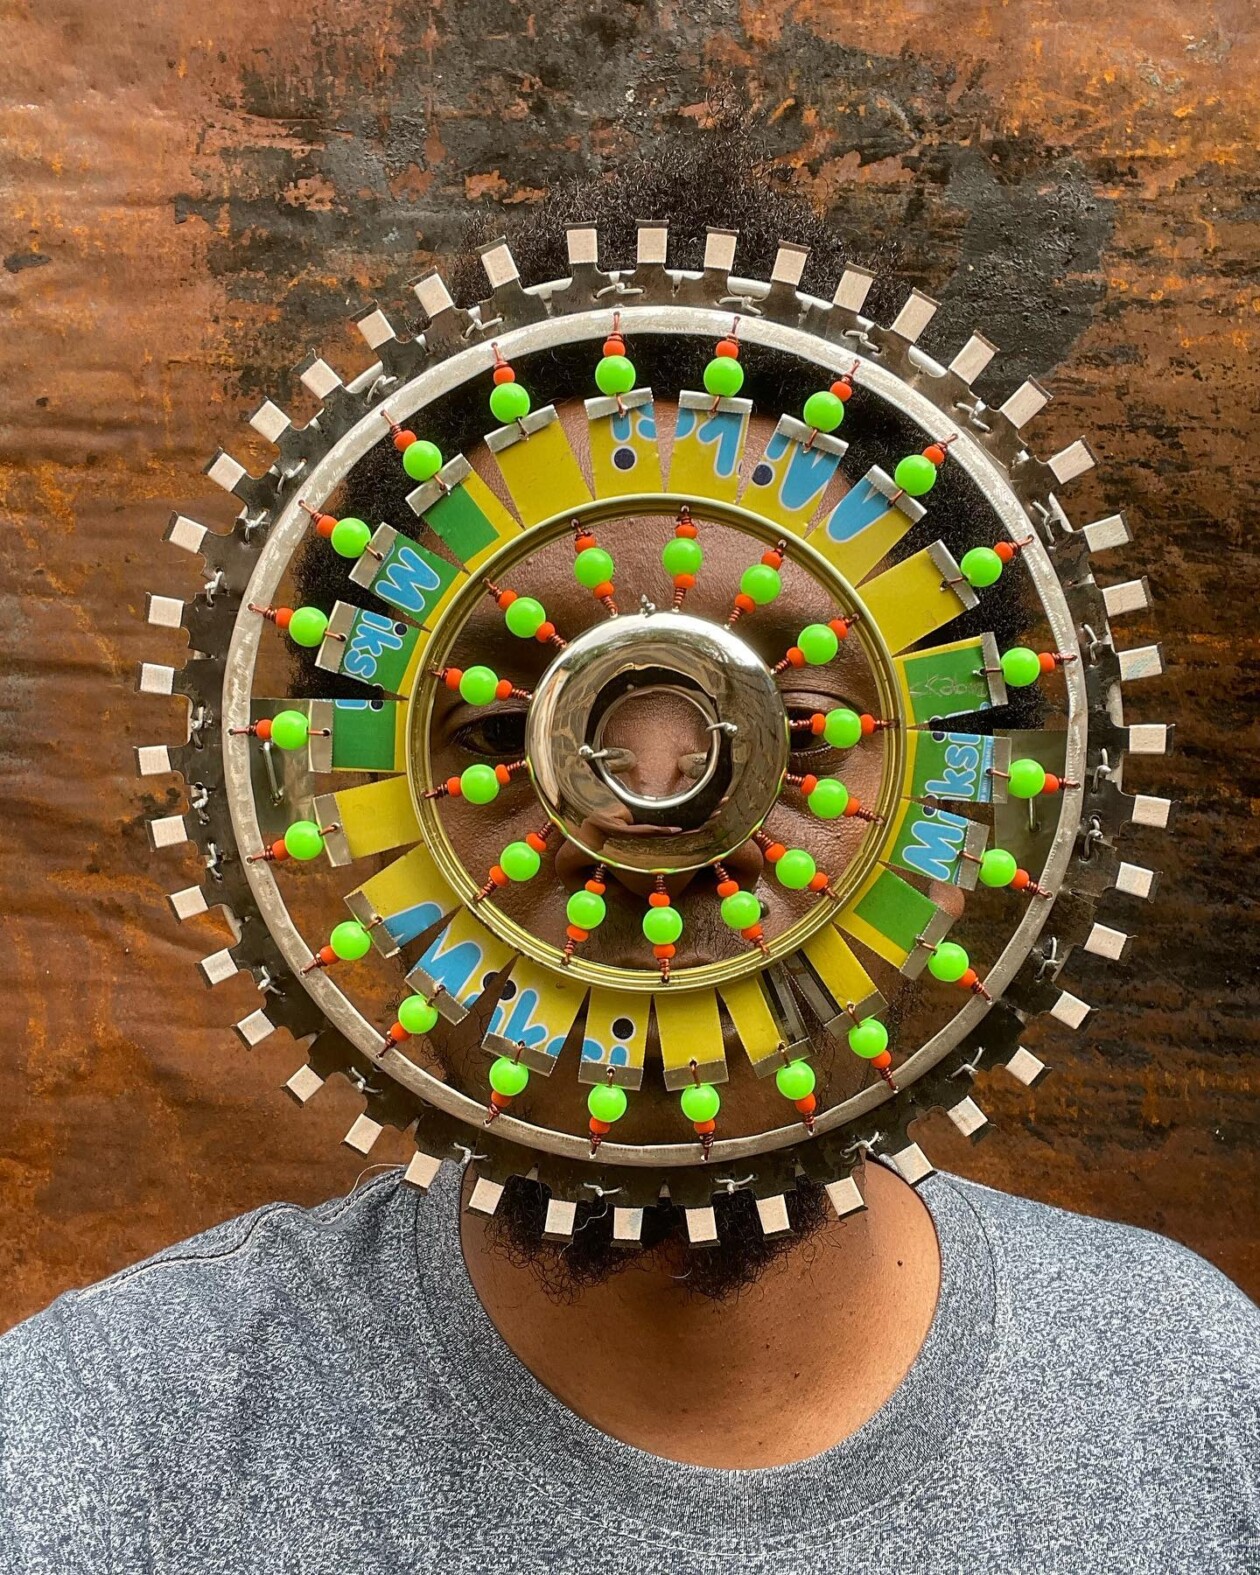 Cyrus Kabiru Crafts Intricate Masks And Goggles From Recycled Material (3)